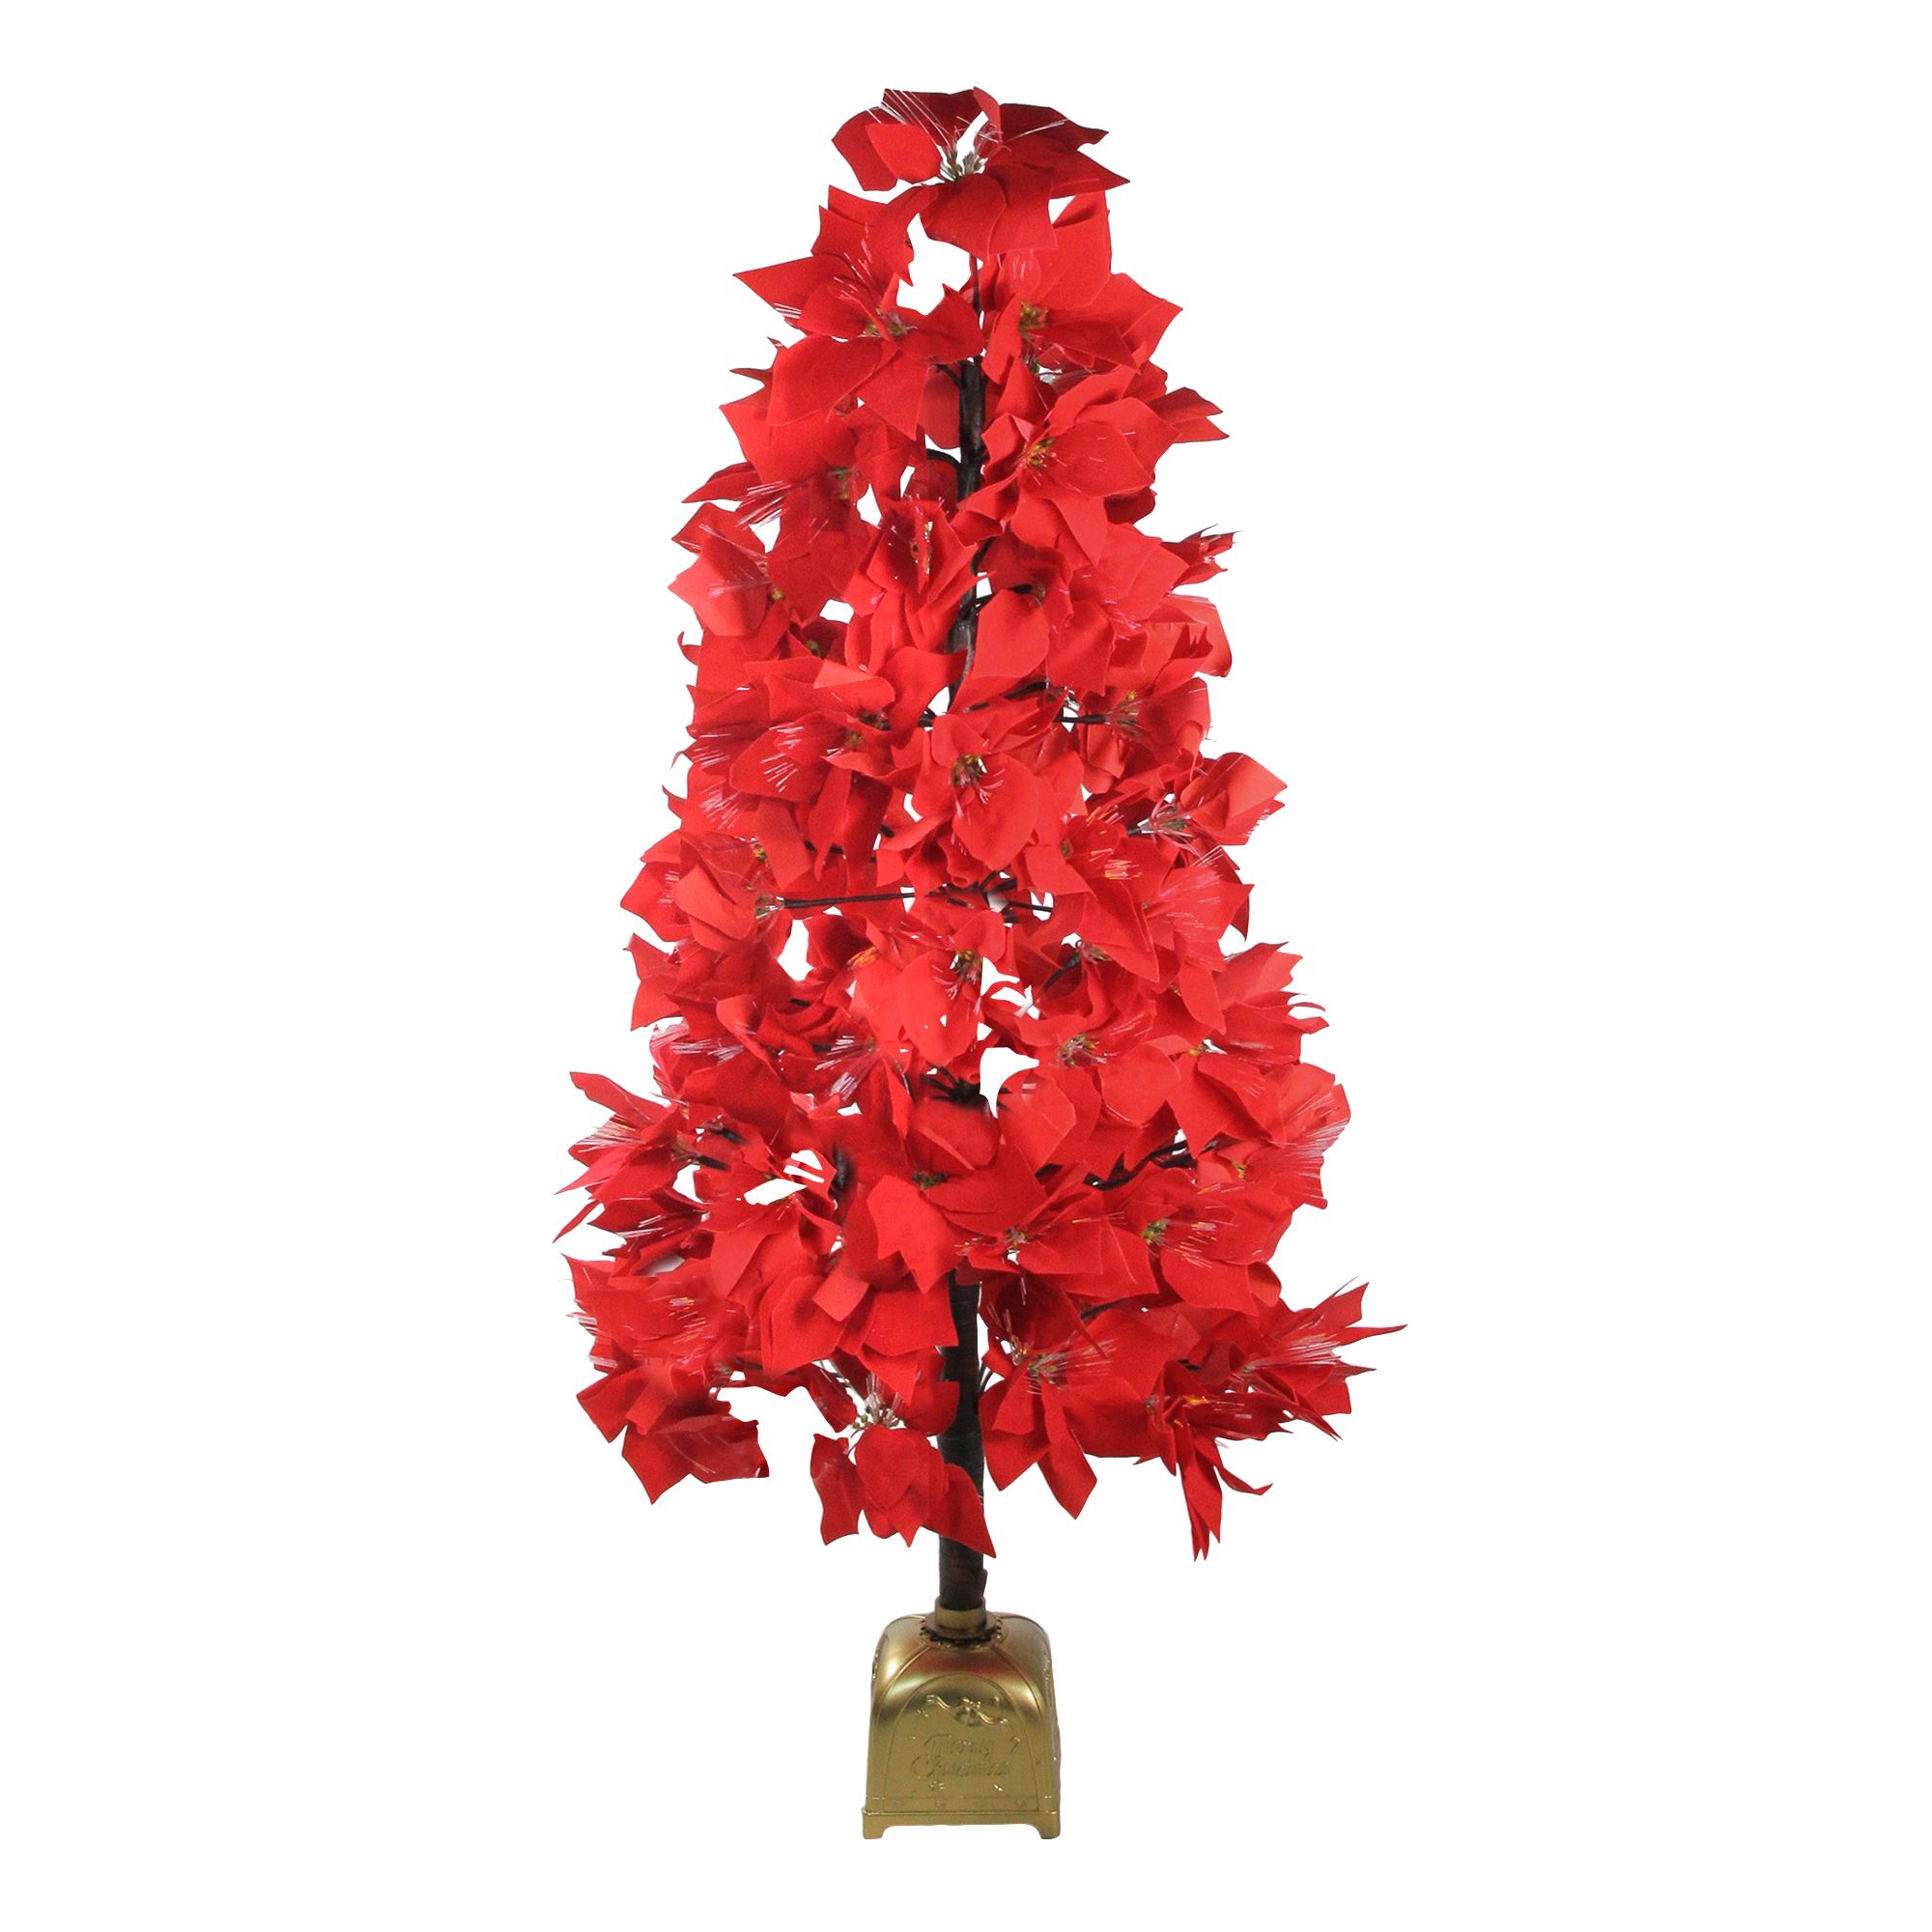 Northlight 4' Pre-lit Fiber Optic Color Changing Red Poinsettia Christmas Tree